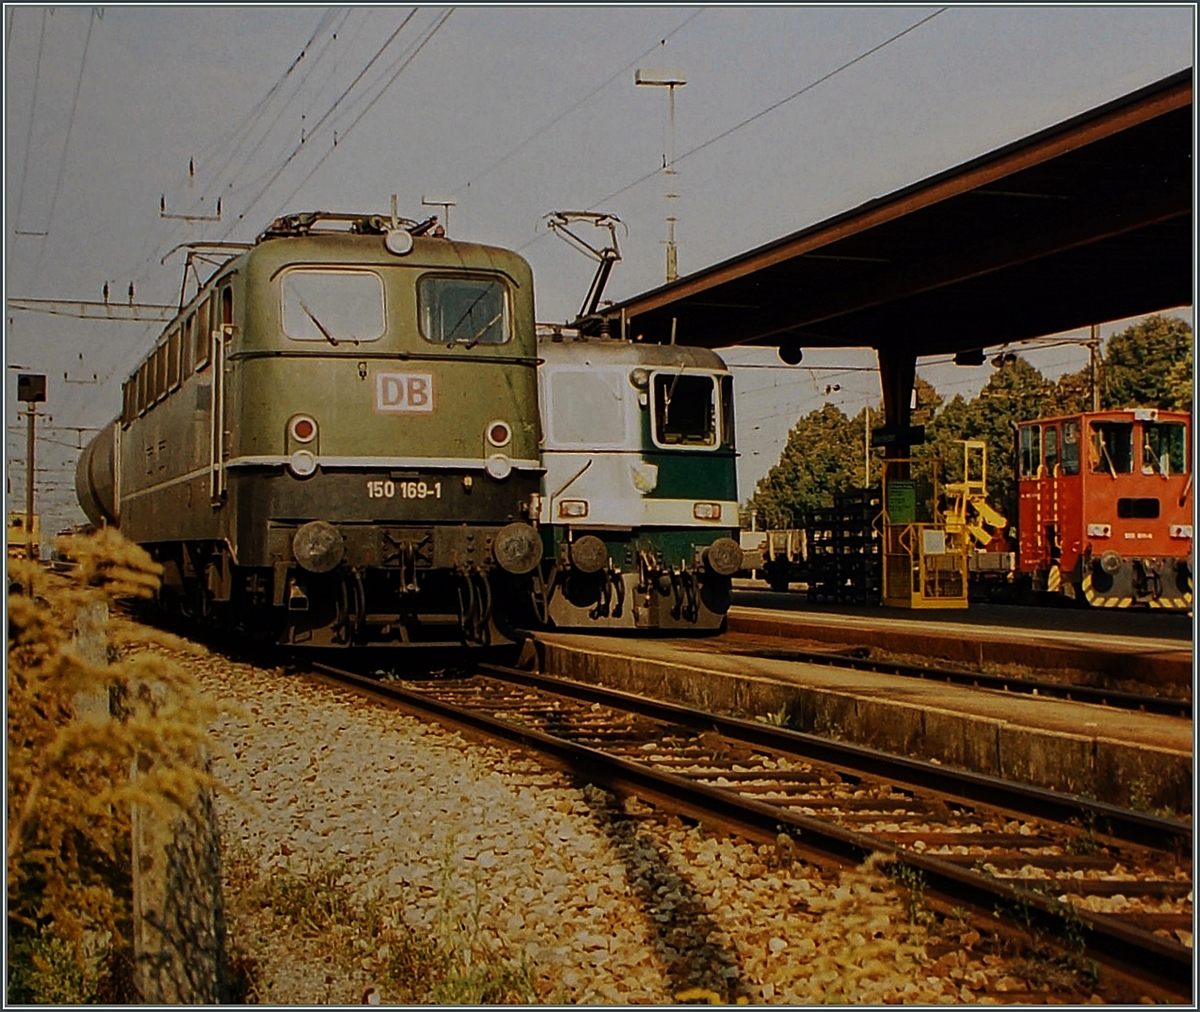 The DB 150 169-1 in Weinfelden.
scanned picture/26.09.1996